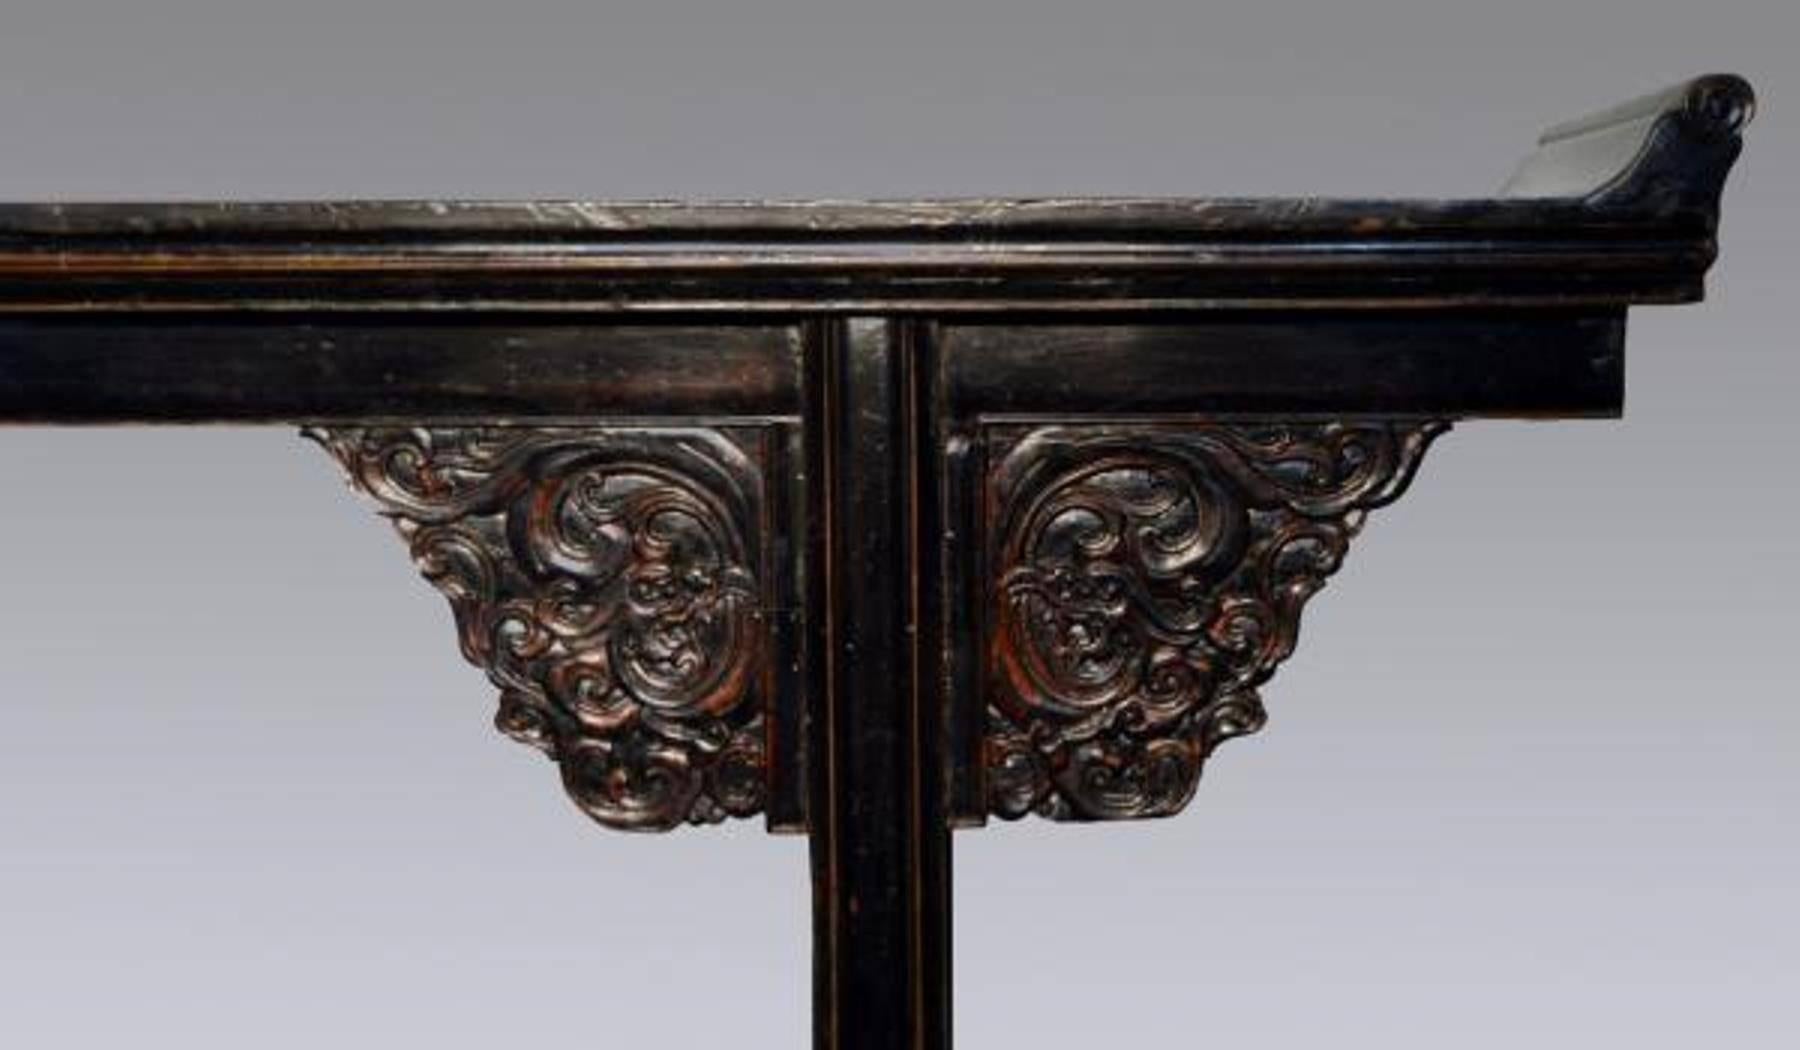 Lacquered Antique Black Lacquer Console Table with Carved Details from China, circa 1800s